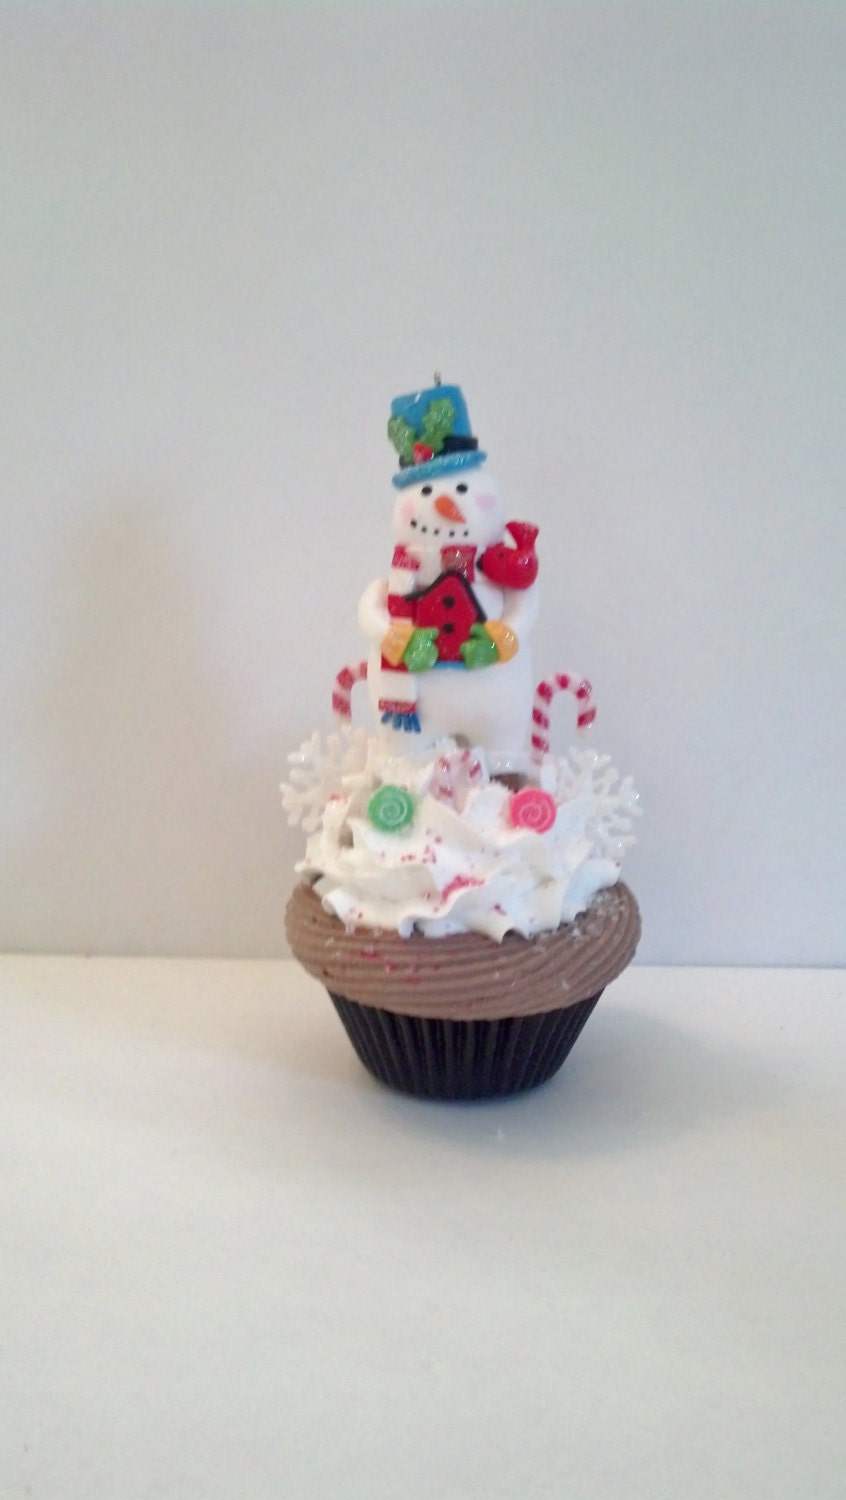 Snowman and Candy Fake Cupcake Photo Prop for Christmas Party Decorations, Shop Displays, Tree Ornaments, Home Accents, Secret Santa